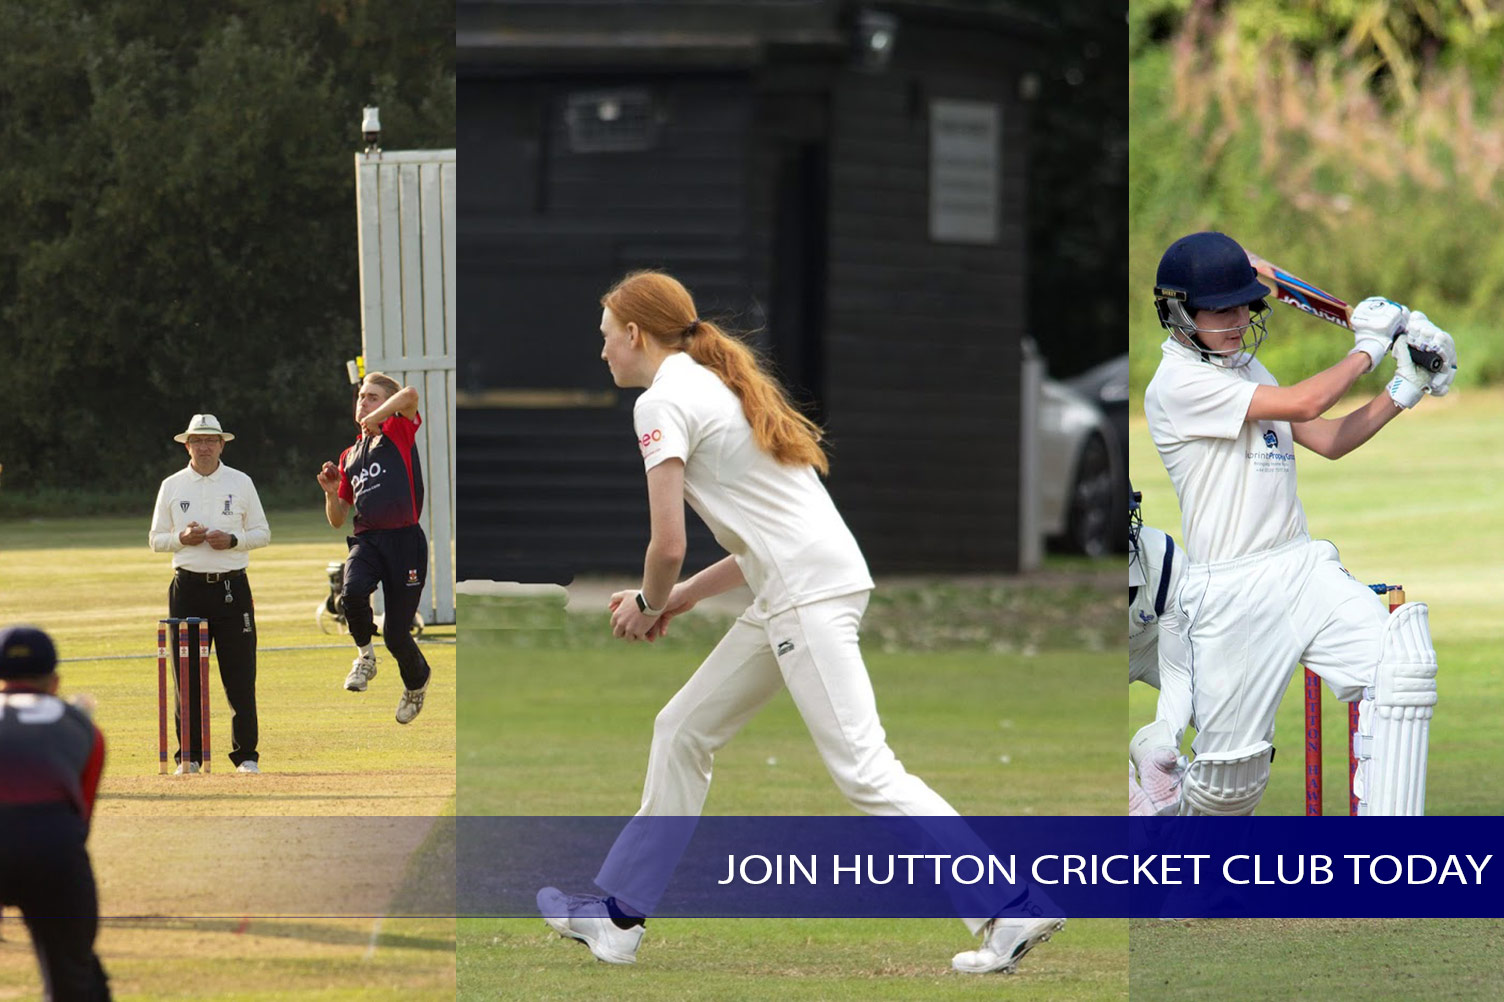 Join Hutton Cricket Club Today